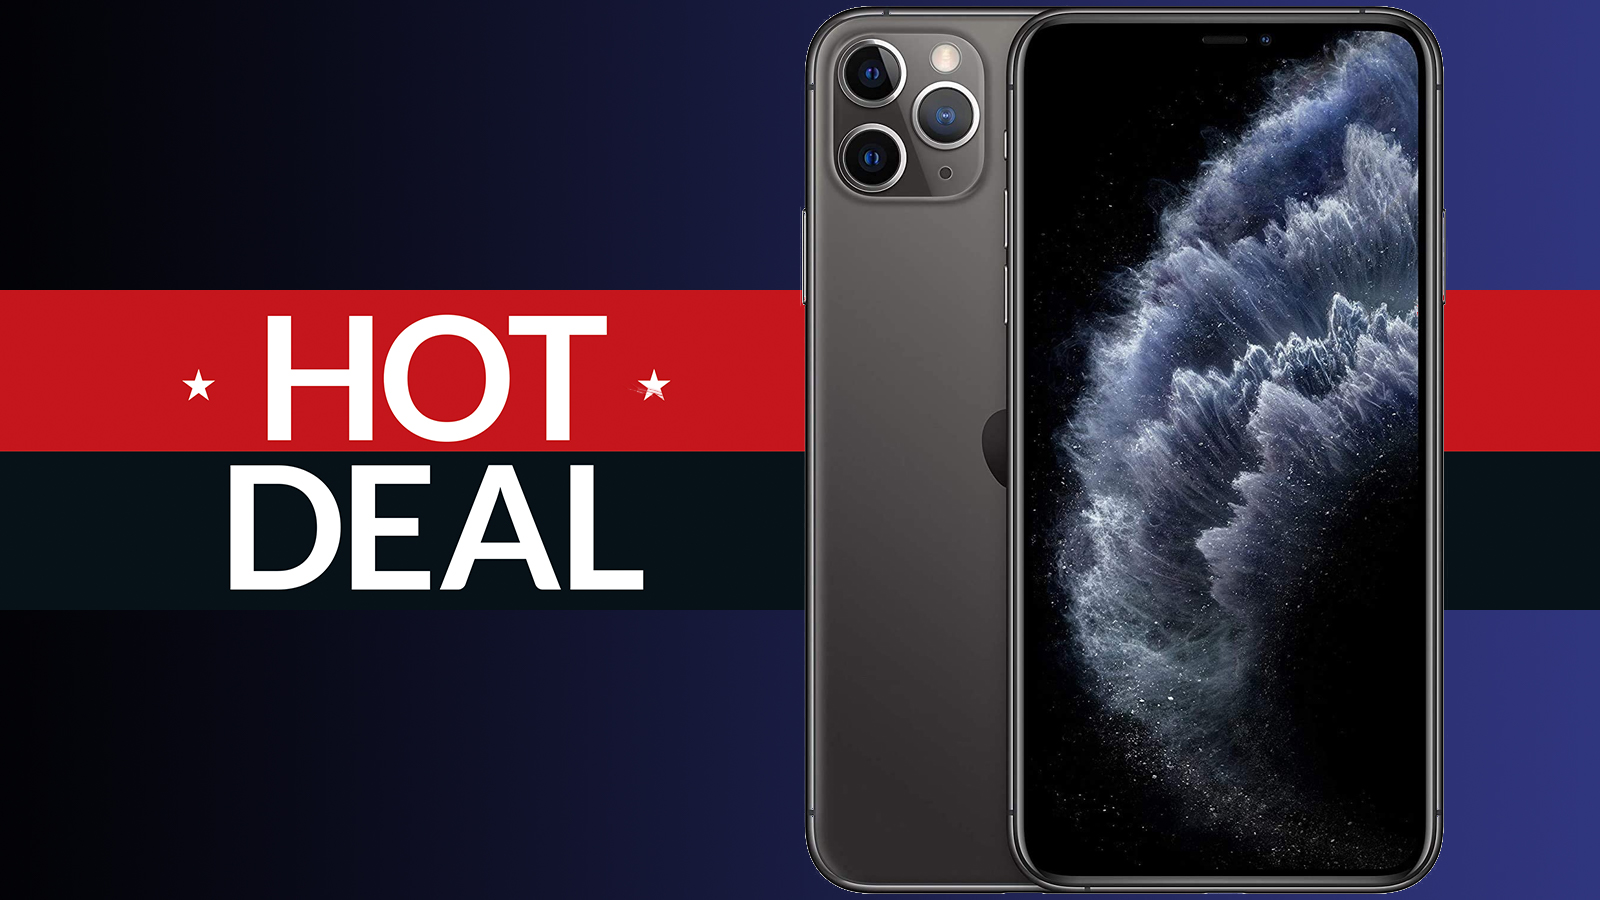 Deals On Iphone 11 Pro Max Smartphones Save Up To 1 000 With Eligible Trade Ins T3 - how to trade on mobile roblox